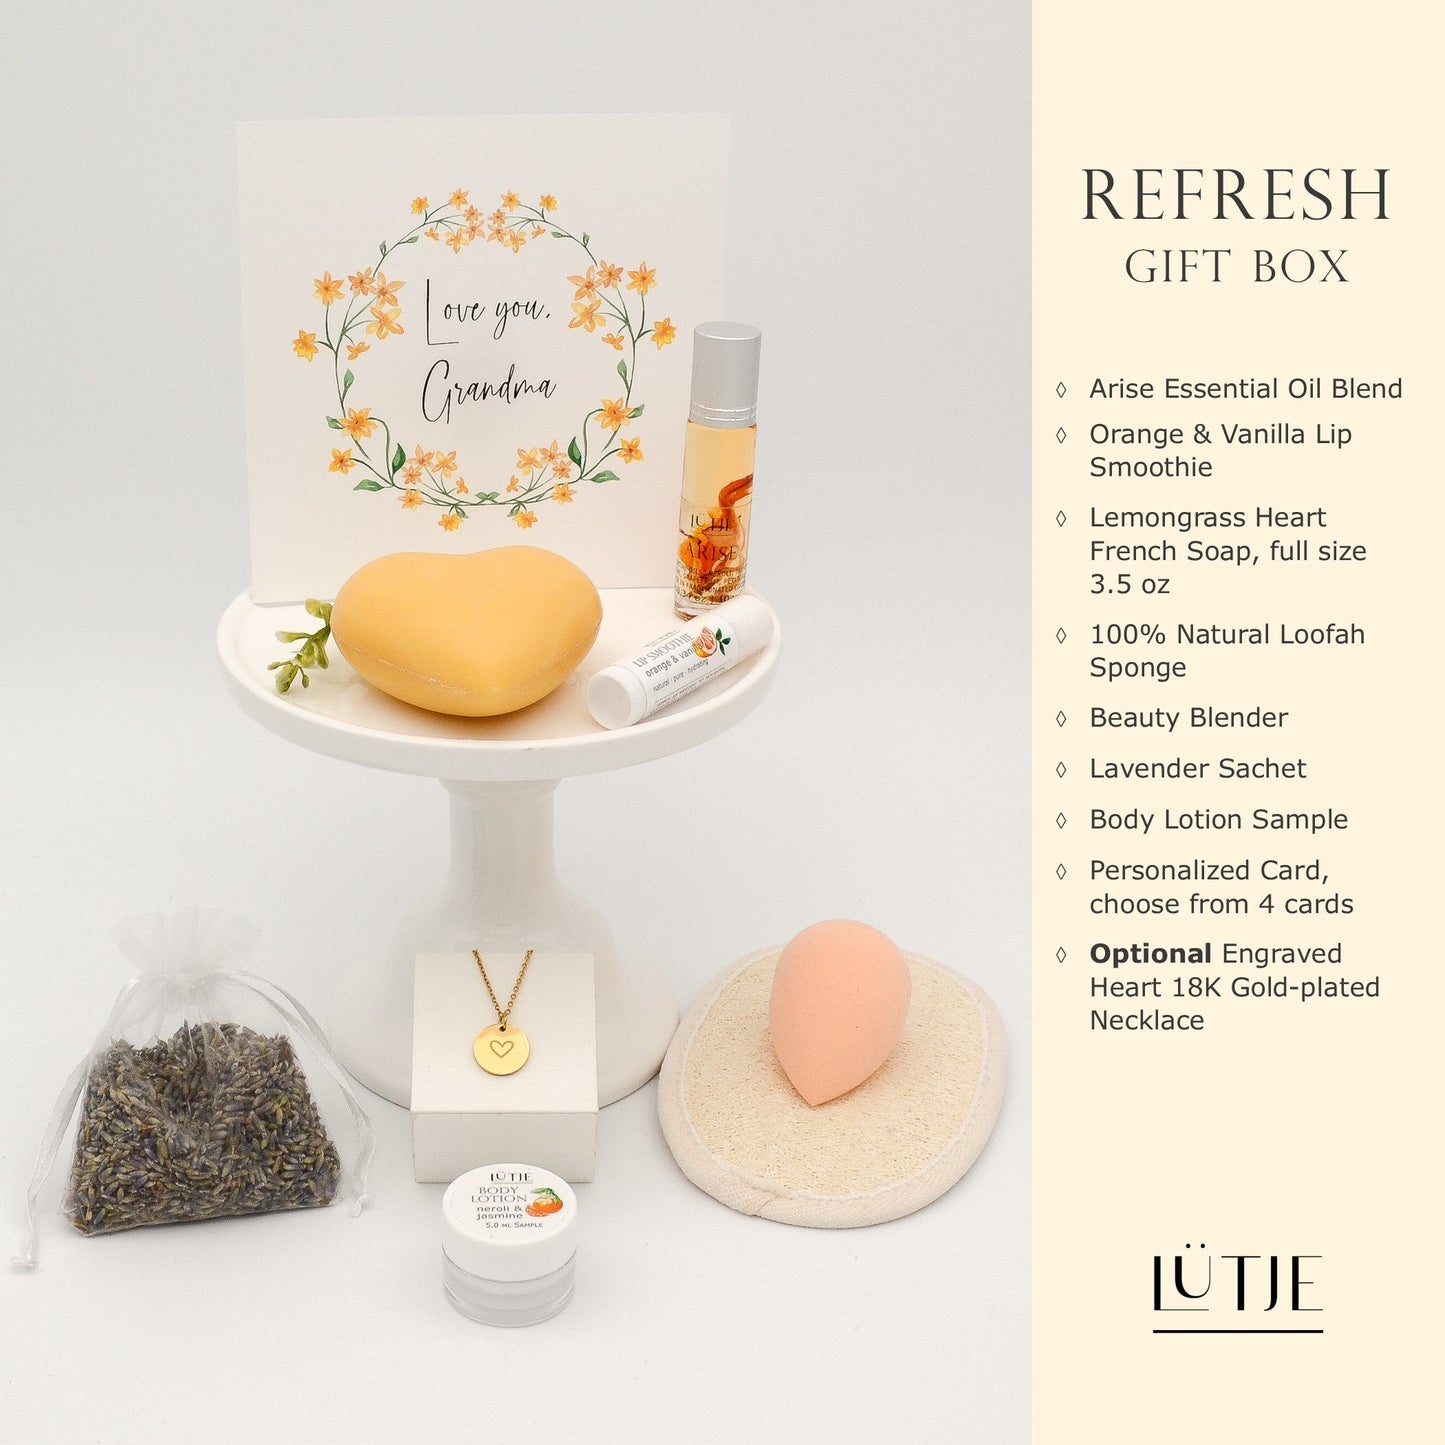 Refresh Gift Box for women, mom, BFF, wife, daughter, sister, or grandma, includes essential oil, French soap, lip balm, hydrating face mask, and optional 18K gold-plated necklace with engraved heart.